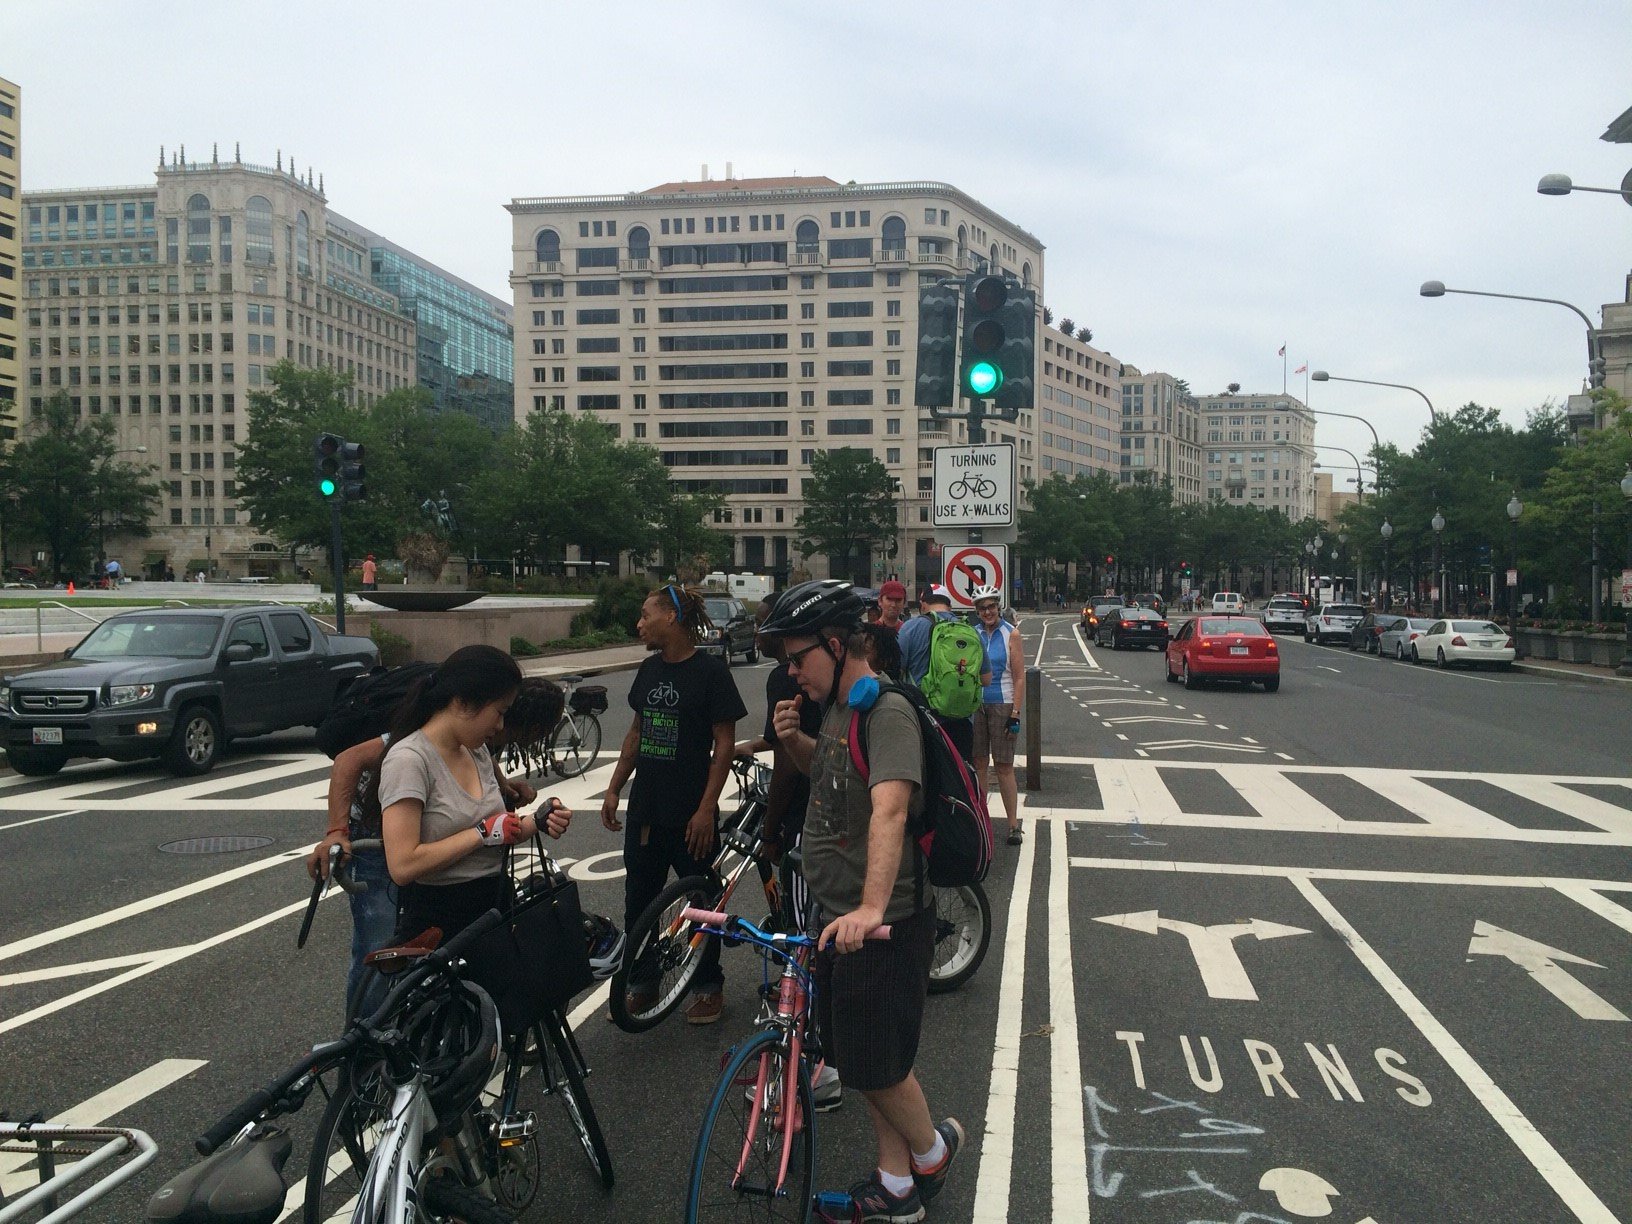 "It's fairly common for a cyclist to have a near miss or a collision with a vehicle that has struck them, making one of those illegal U-turns," said Samantha Wetzel, who organized the gathering.(WTOP/Mike Murillo)